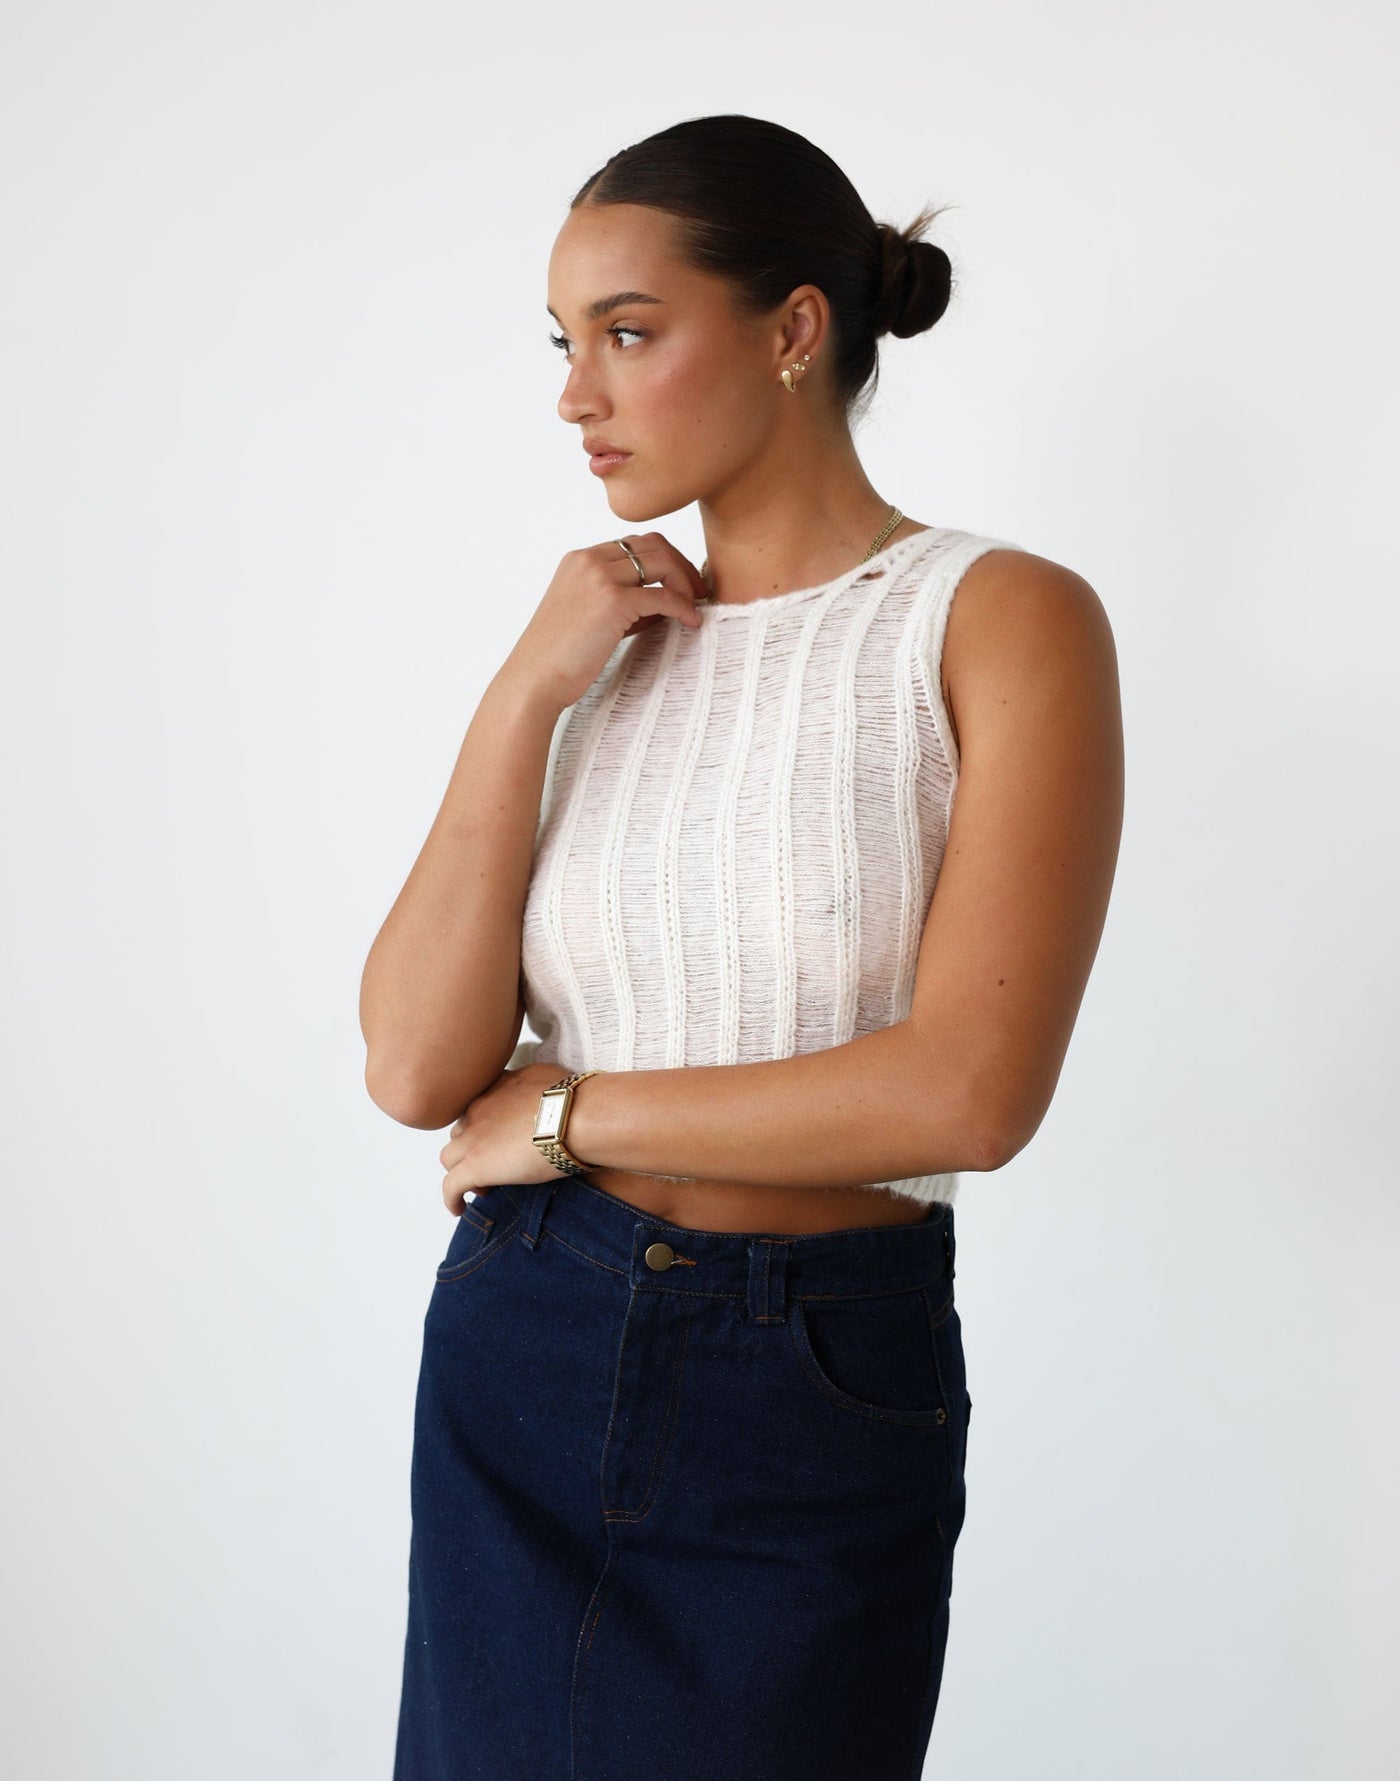 Azura Top (Off-White) - Distressed Knit Crop Top - Women's Top - Charcoal Clothing